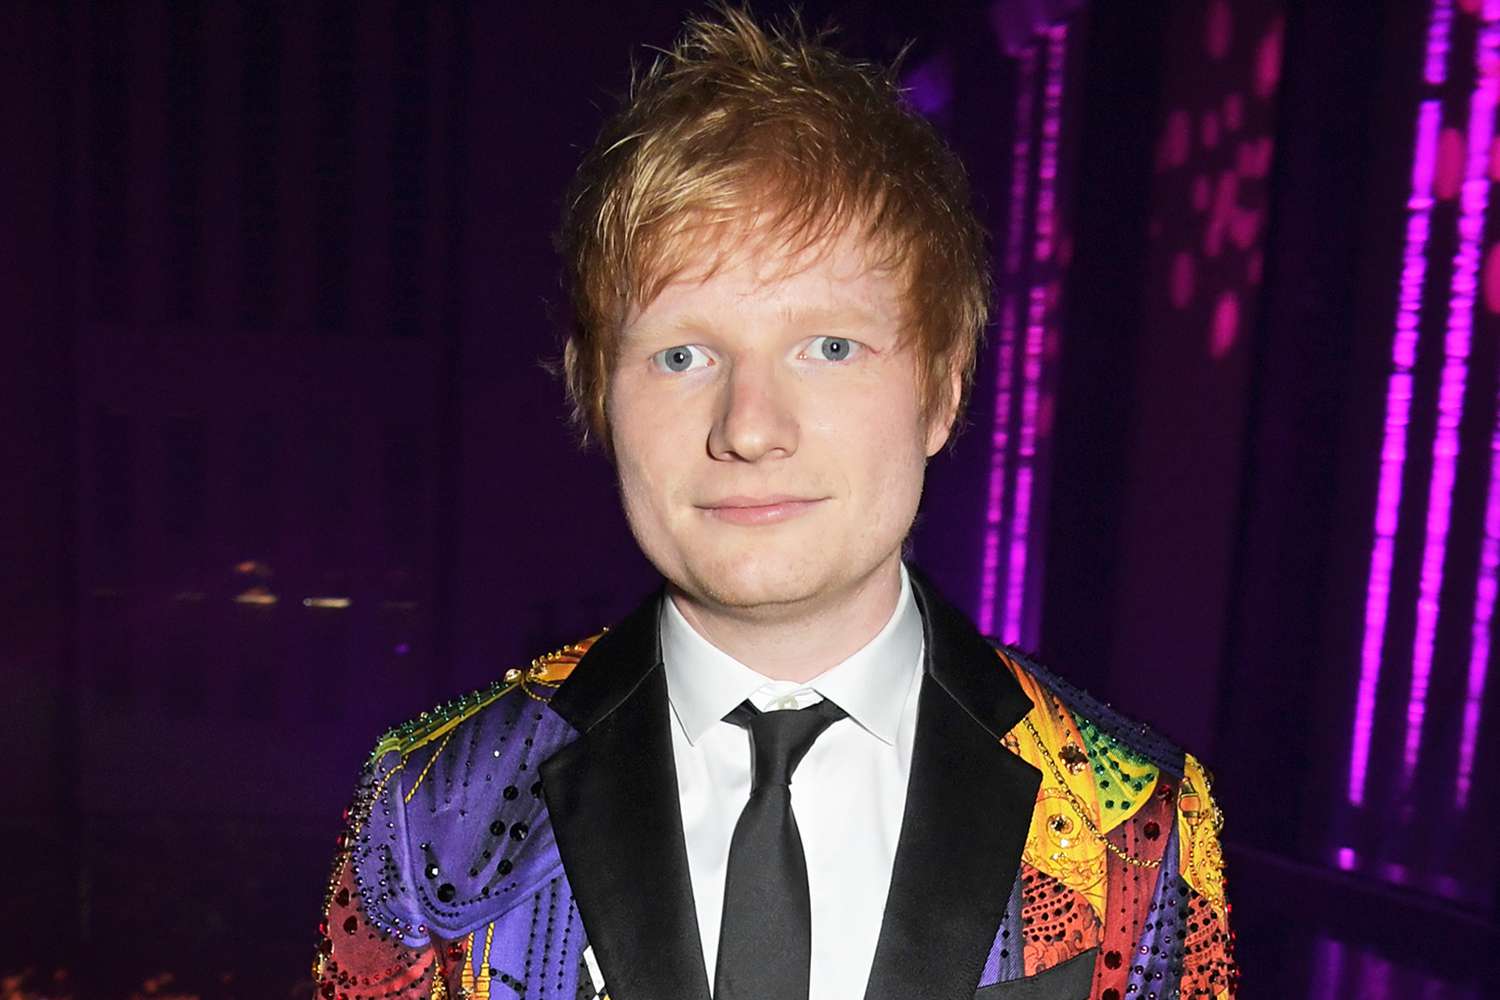 Ed Sheeran attends the 24th GQ Men of the Year Awards in association with BOSS at Tate Modern on September 1, 2021 in London, England.